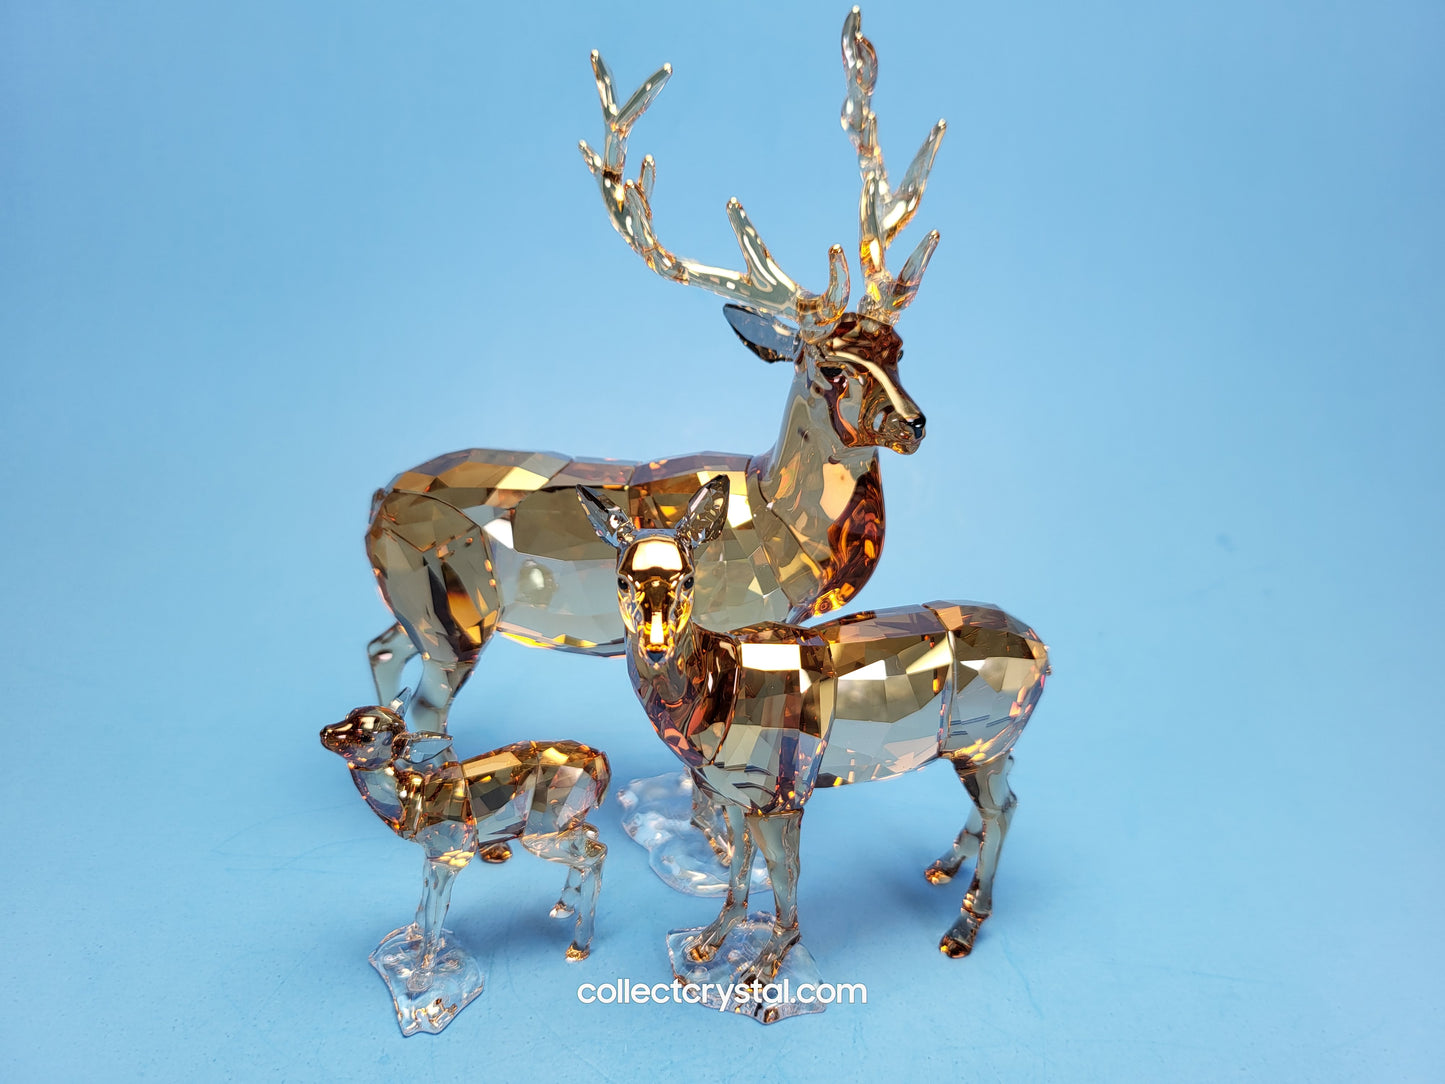 ALEXANDER STAG 5487948 Signed by Designer 2020 ANNUAL EDITION